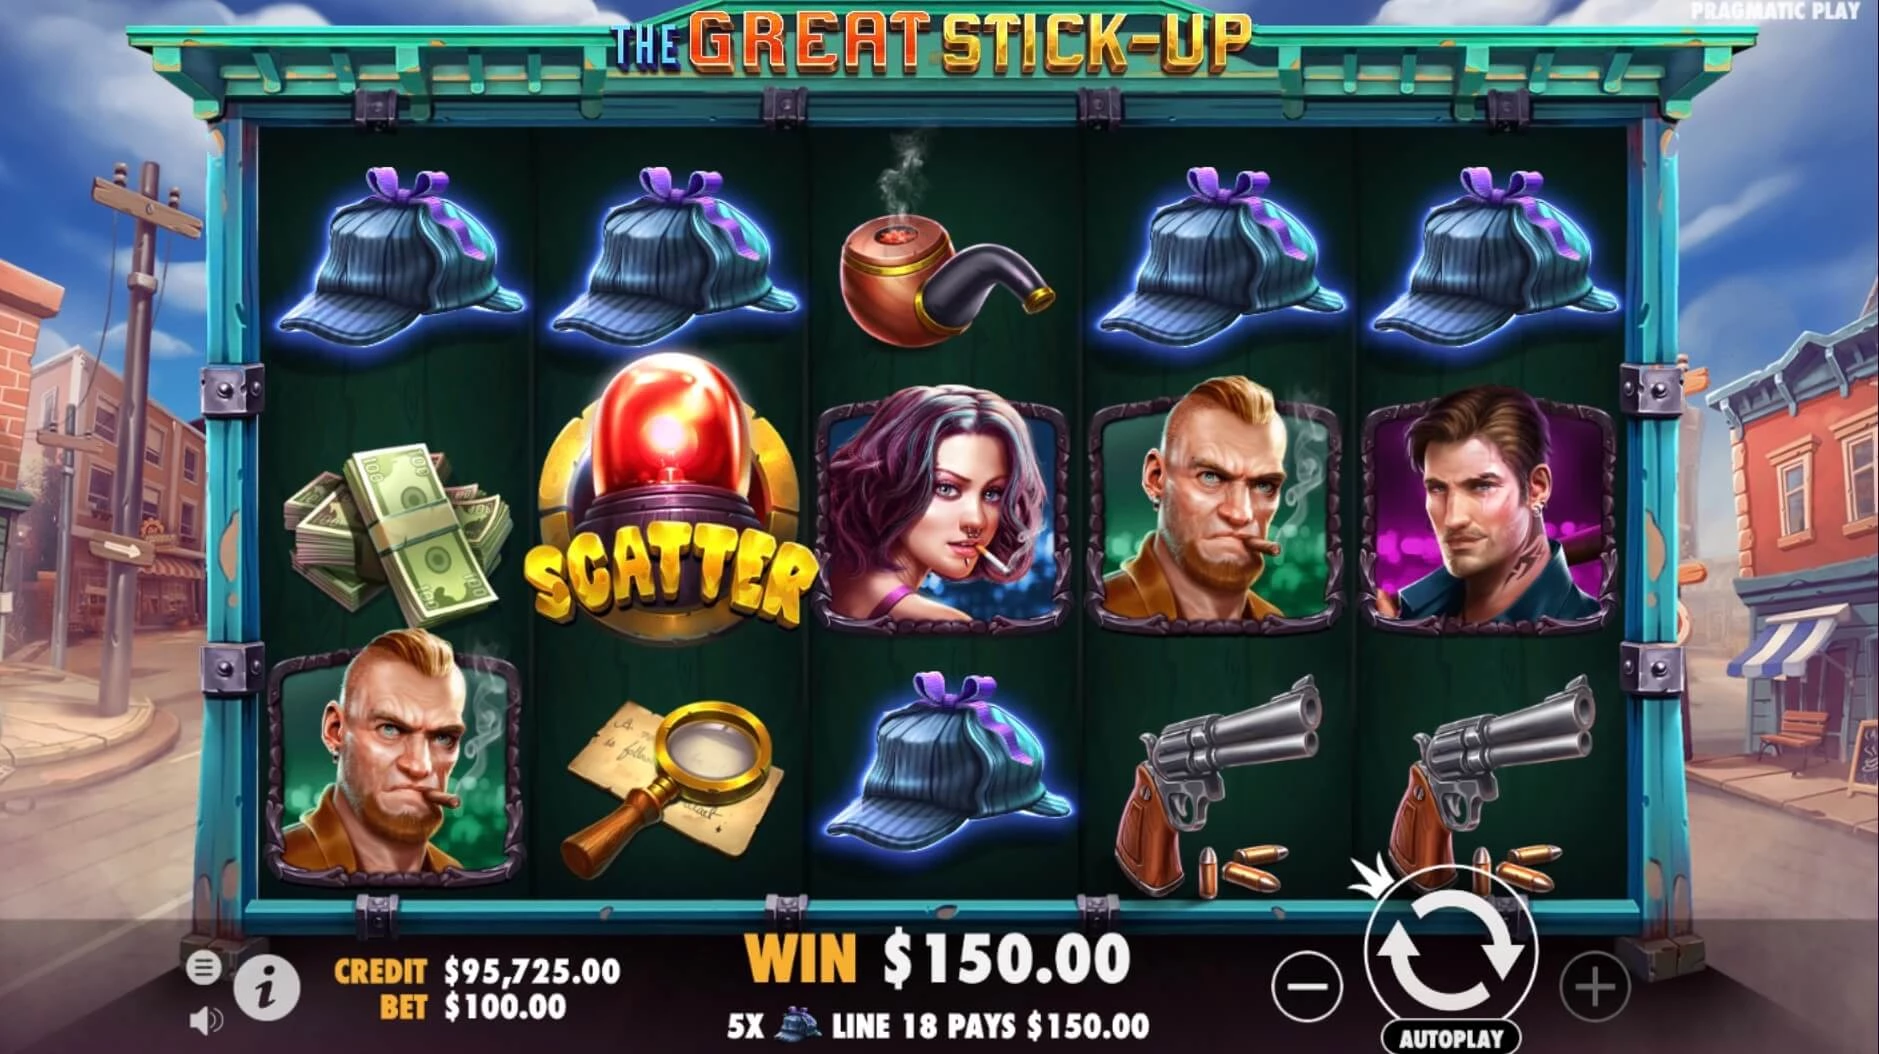 The Great Stick-up win money